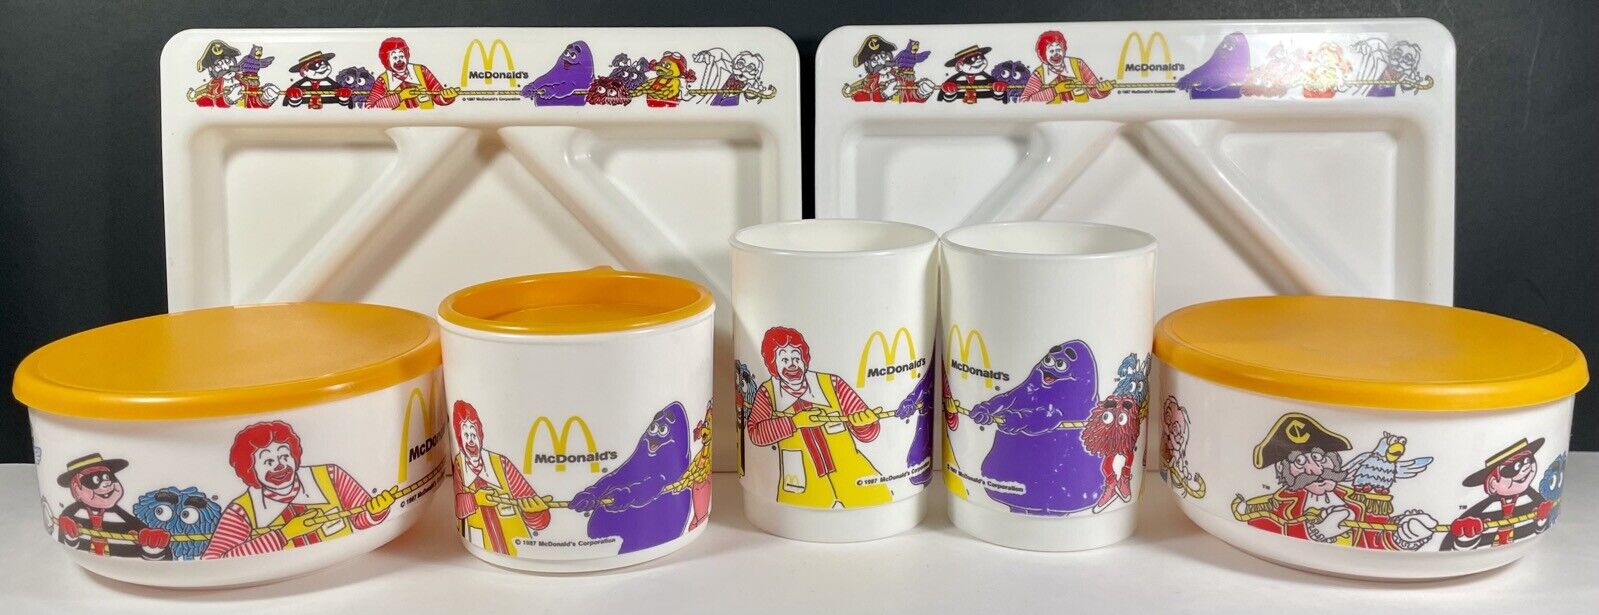 VINTAGE 1980\'S MCDONALD\'S TRAYS, BOWLS & CUPS WHIRLEY INDUSTRIES